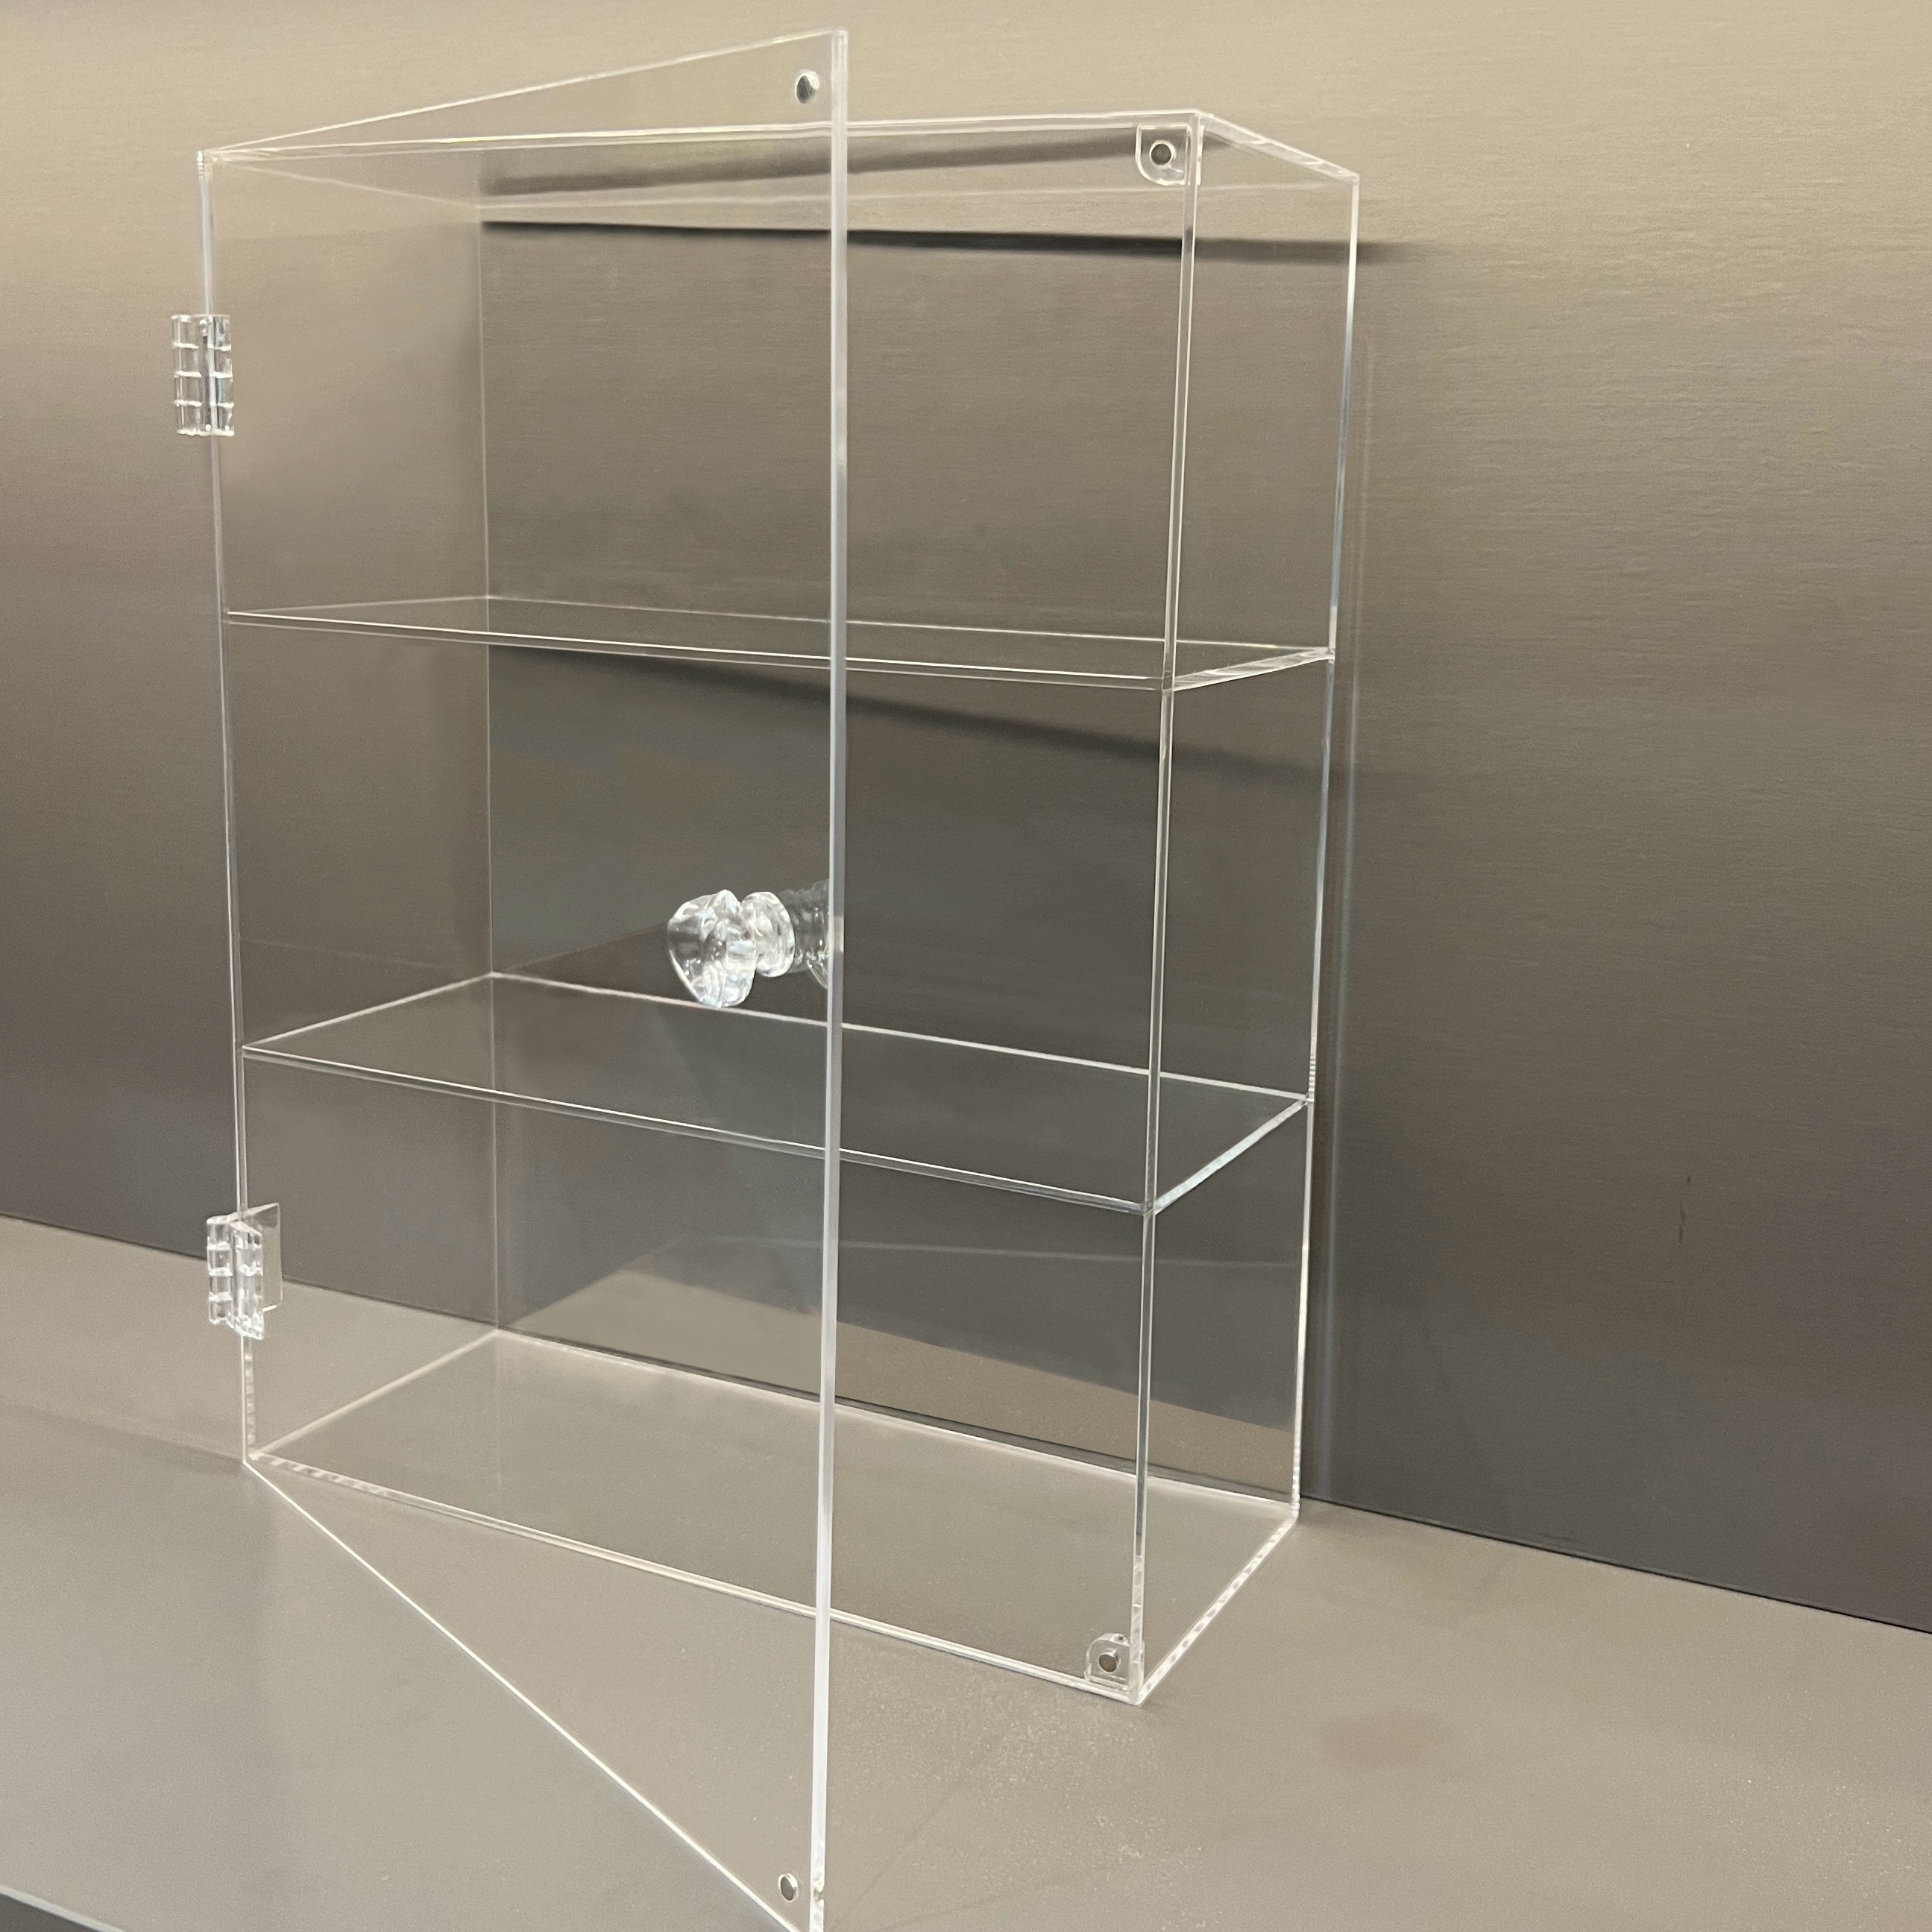 1pc Transparent Dustproof Display Cabinet, Easy To Open Without Assembly,  Made Of Acrylic Material, Suitable For Storing Small Items, Hand Made Models